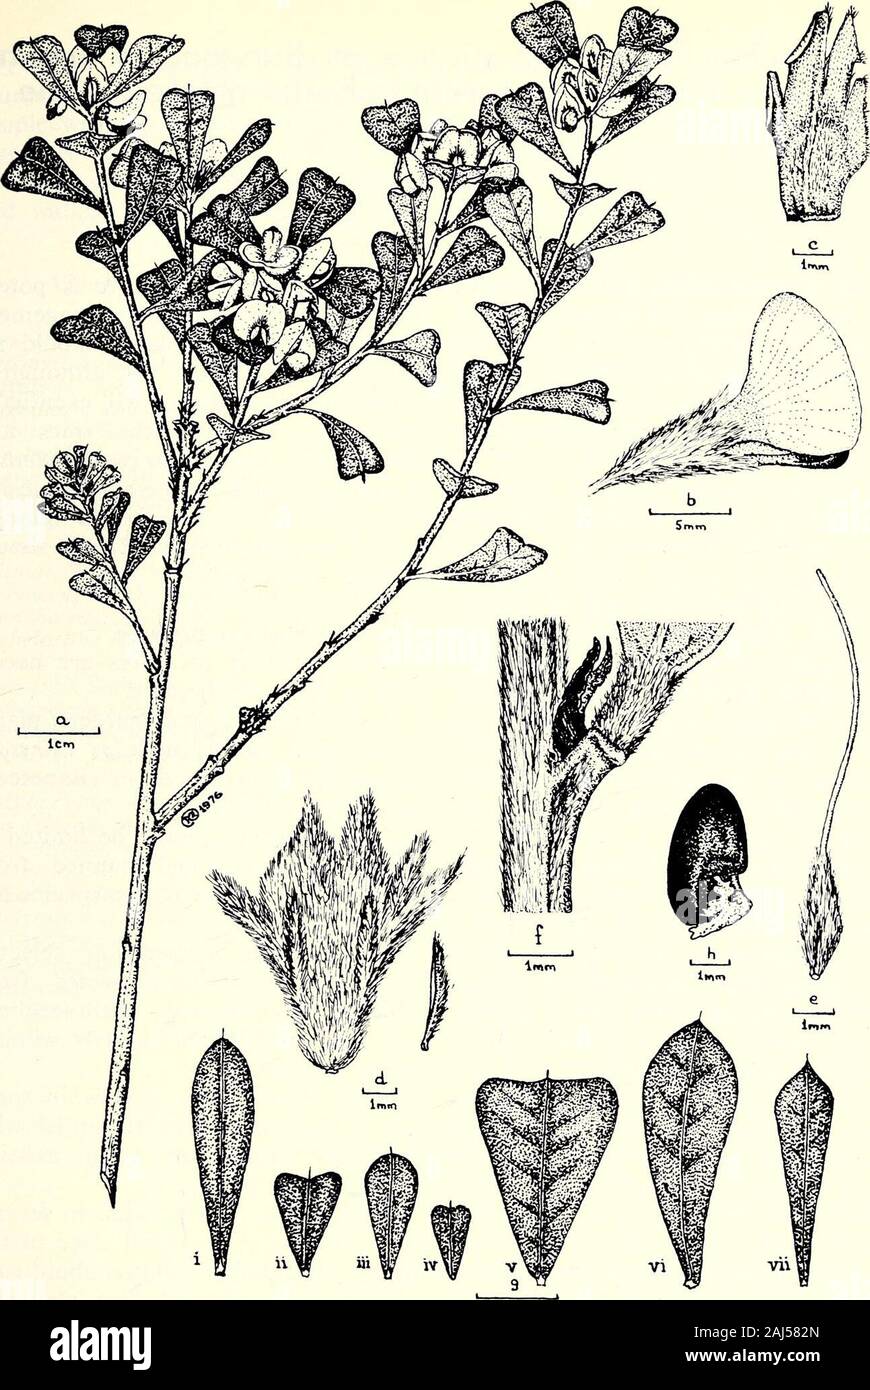 The Victorian naturalist . lismentions a narrow-leaved form fromMts Ida and Korong, and two distinctleaf forms are reported to occur onWilsons Promontory but no collec-tions from the latter area have beenseen. Acknowledgements: I wish to thank the National Her-barium, Melbourne, for permission tostudy the collections and Dr Jim Ross,Senior Botanist, for advice and en-couragement. REFERENCES: Bentham, G. (1864). Flora Australiensis, Vol. 2 (Lovell Reeve & Co., London).Churchill, D. M. and de Corona A. (1972). The Distribution of Victorian Plants. (The Dominion Press: Blackburn.)Thompson, Joy (1 Stock Photo